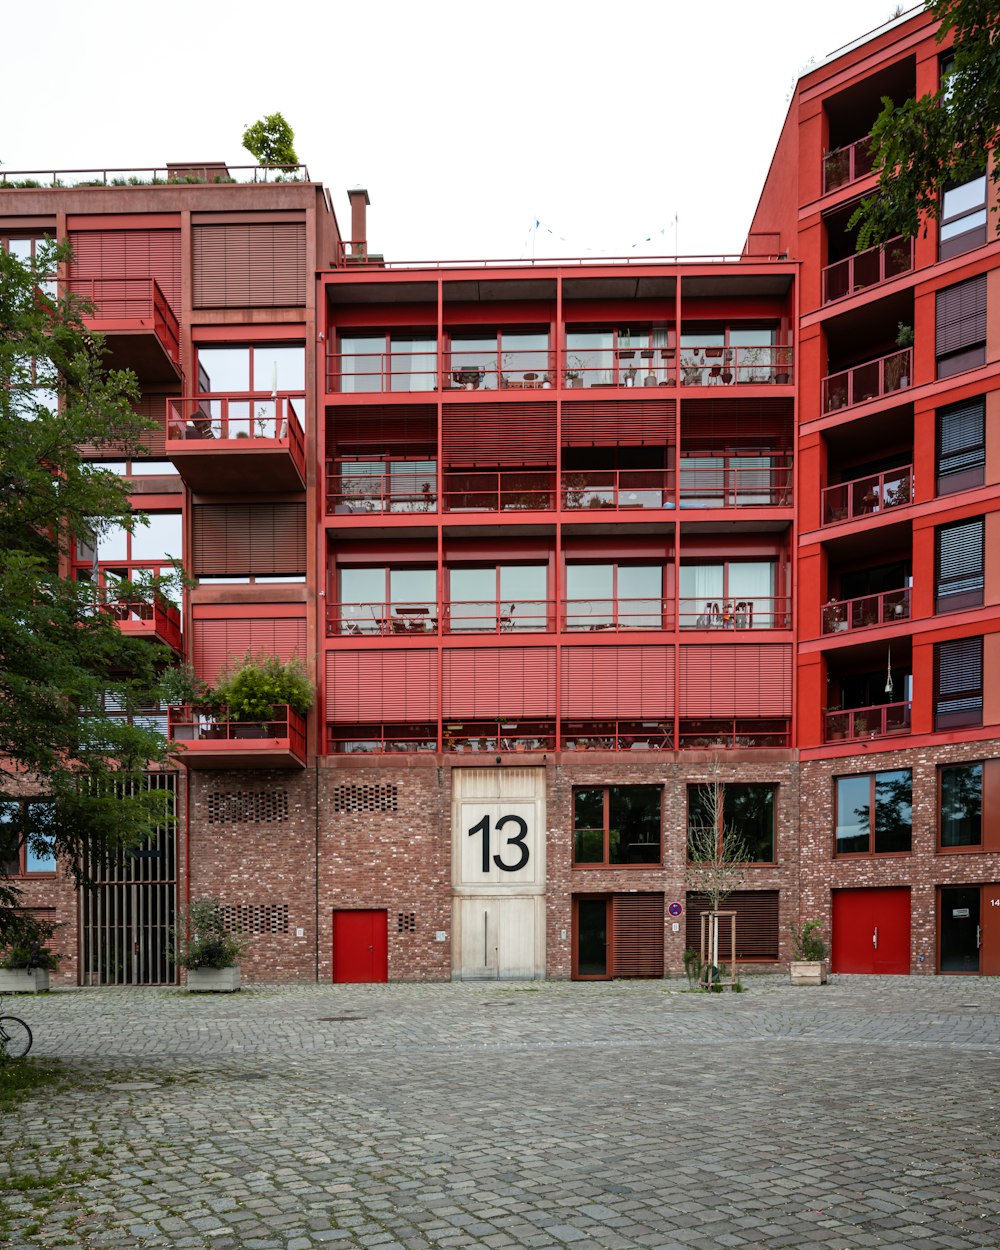 a red building with a number 13 on it